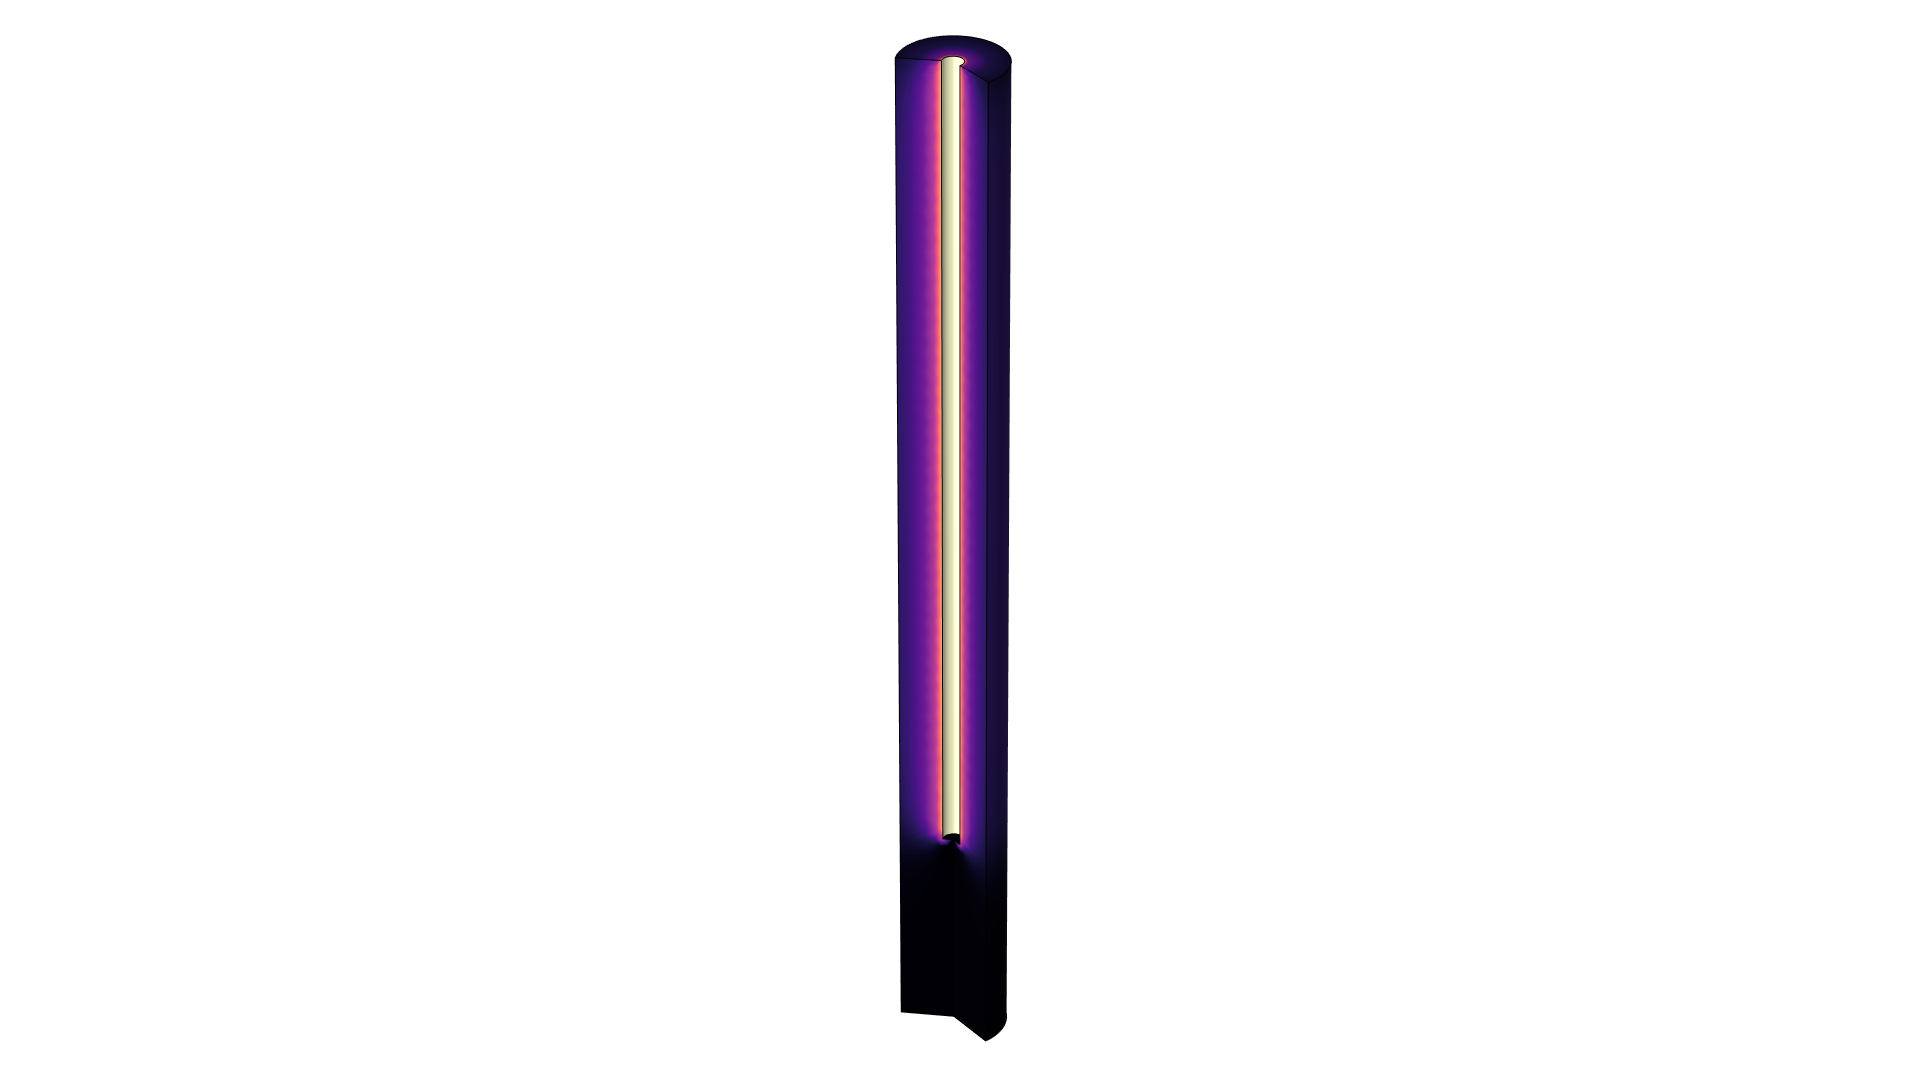 An ultraviolet reactor model in the Magma color table.